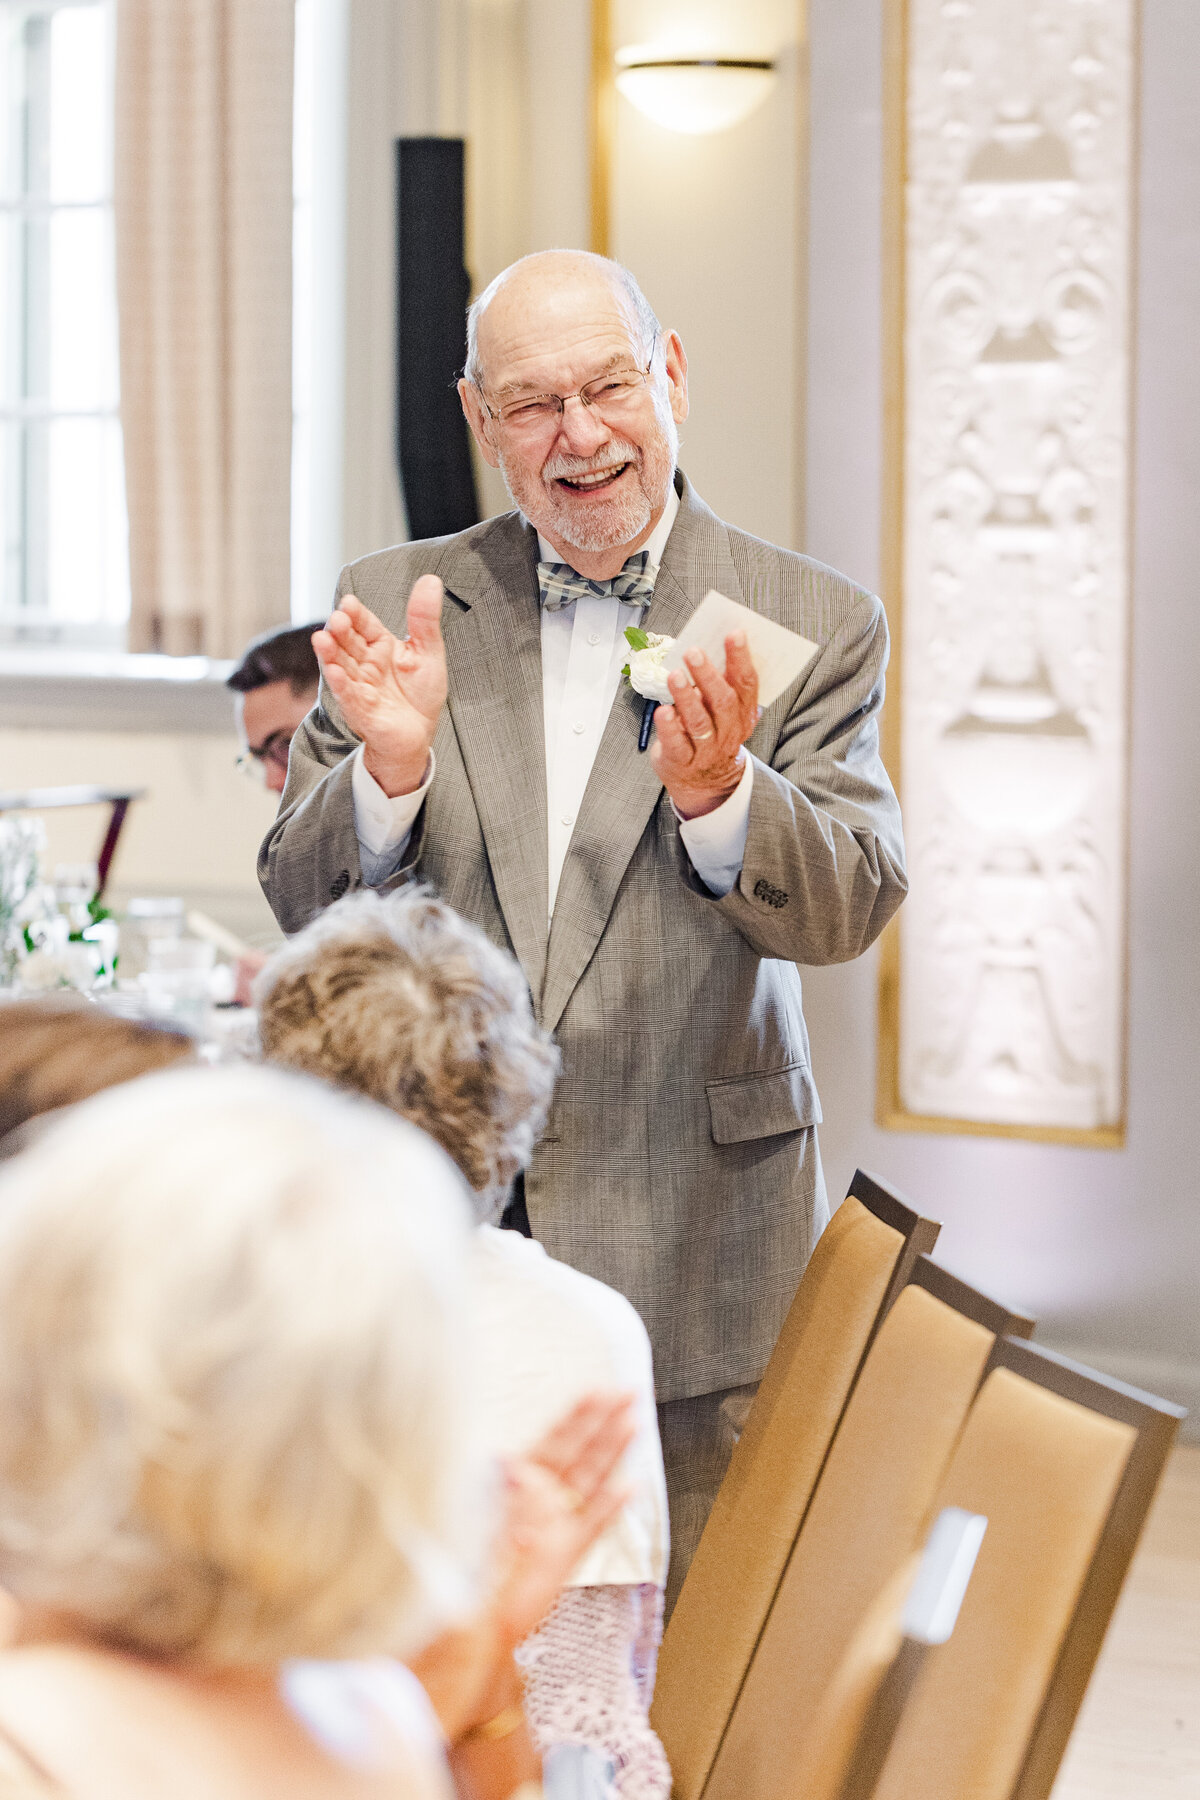 15_grandparent_smiling_clapping_during_speeches